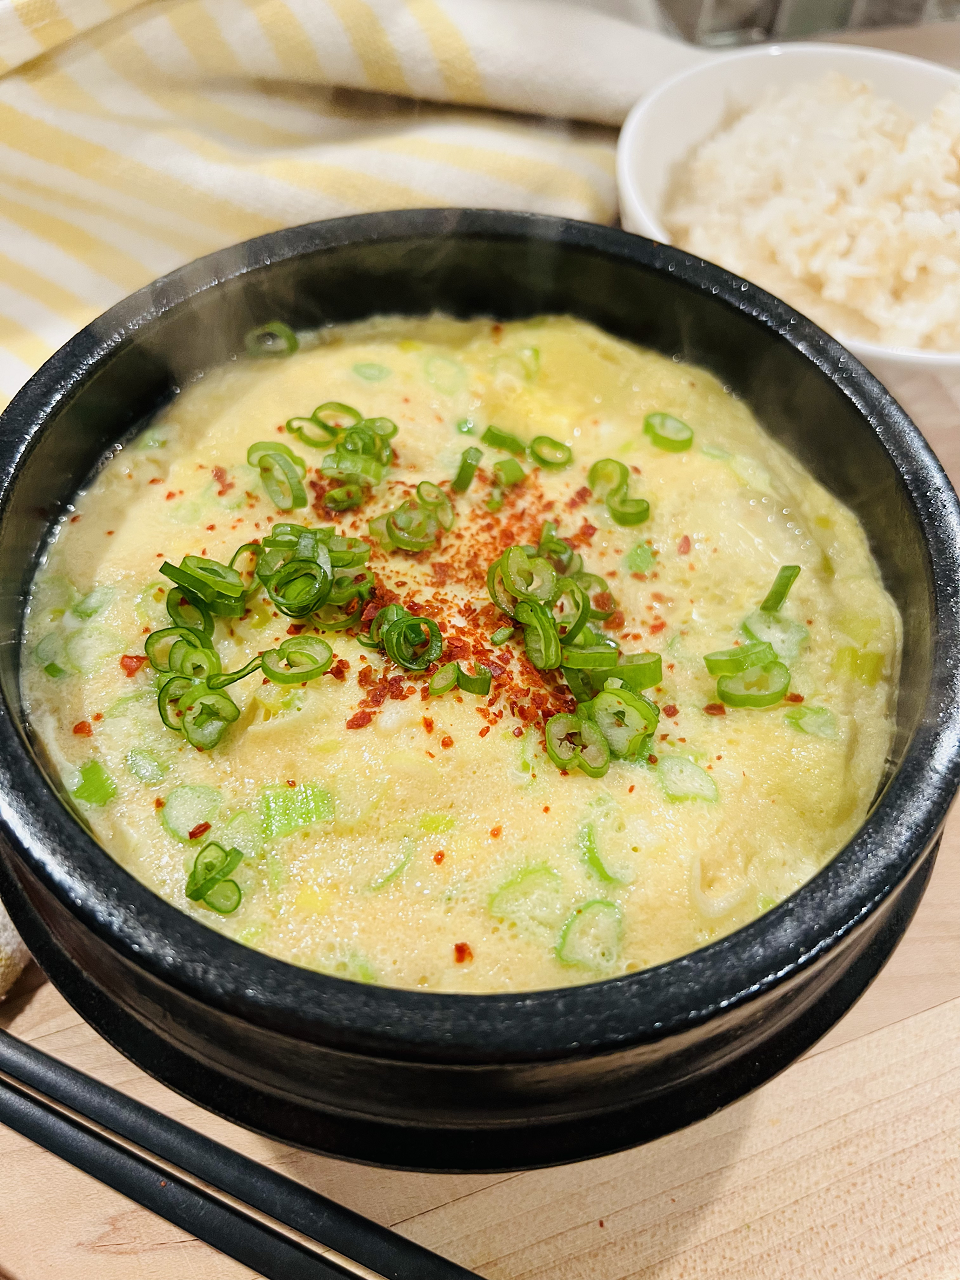 Korean Steamed Eggs topped with green onion and red chili pepper